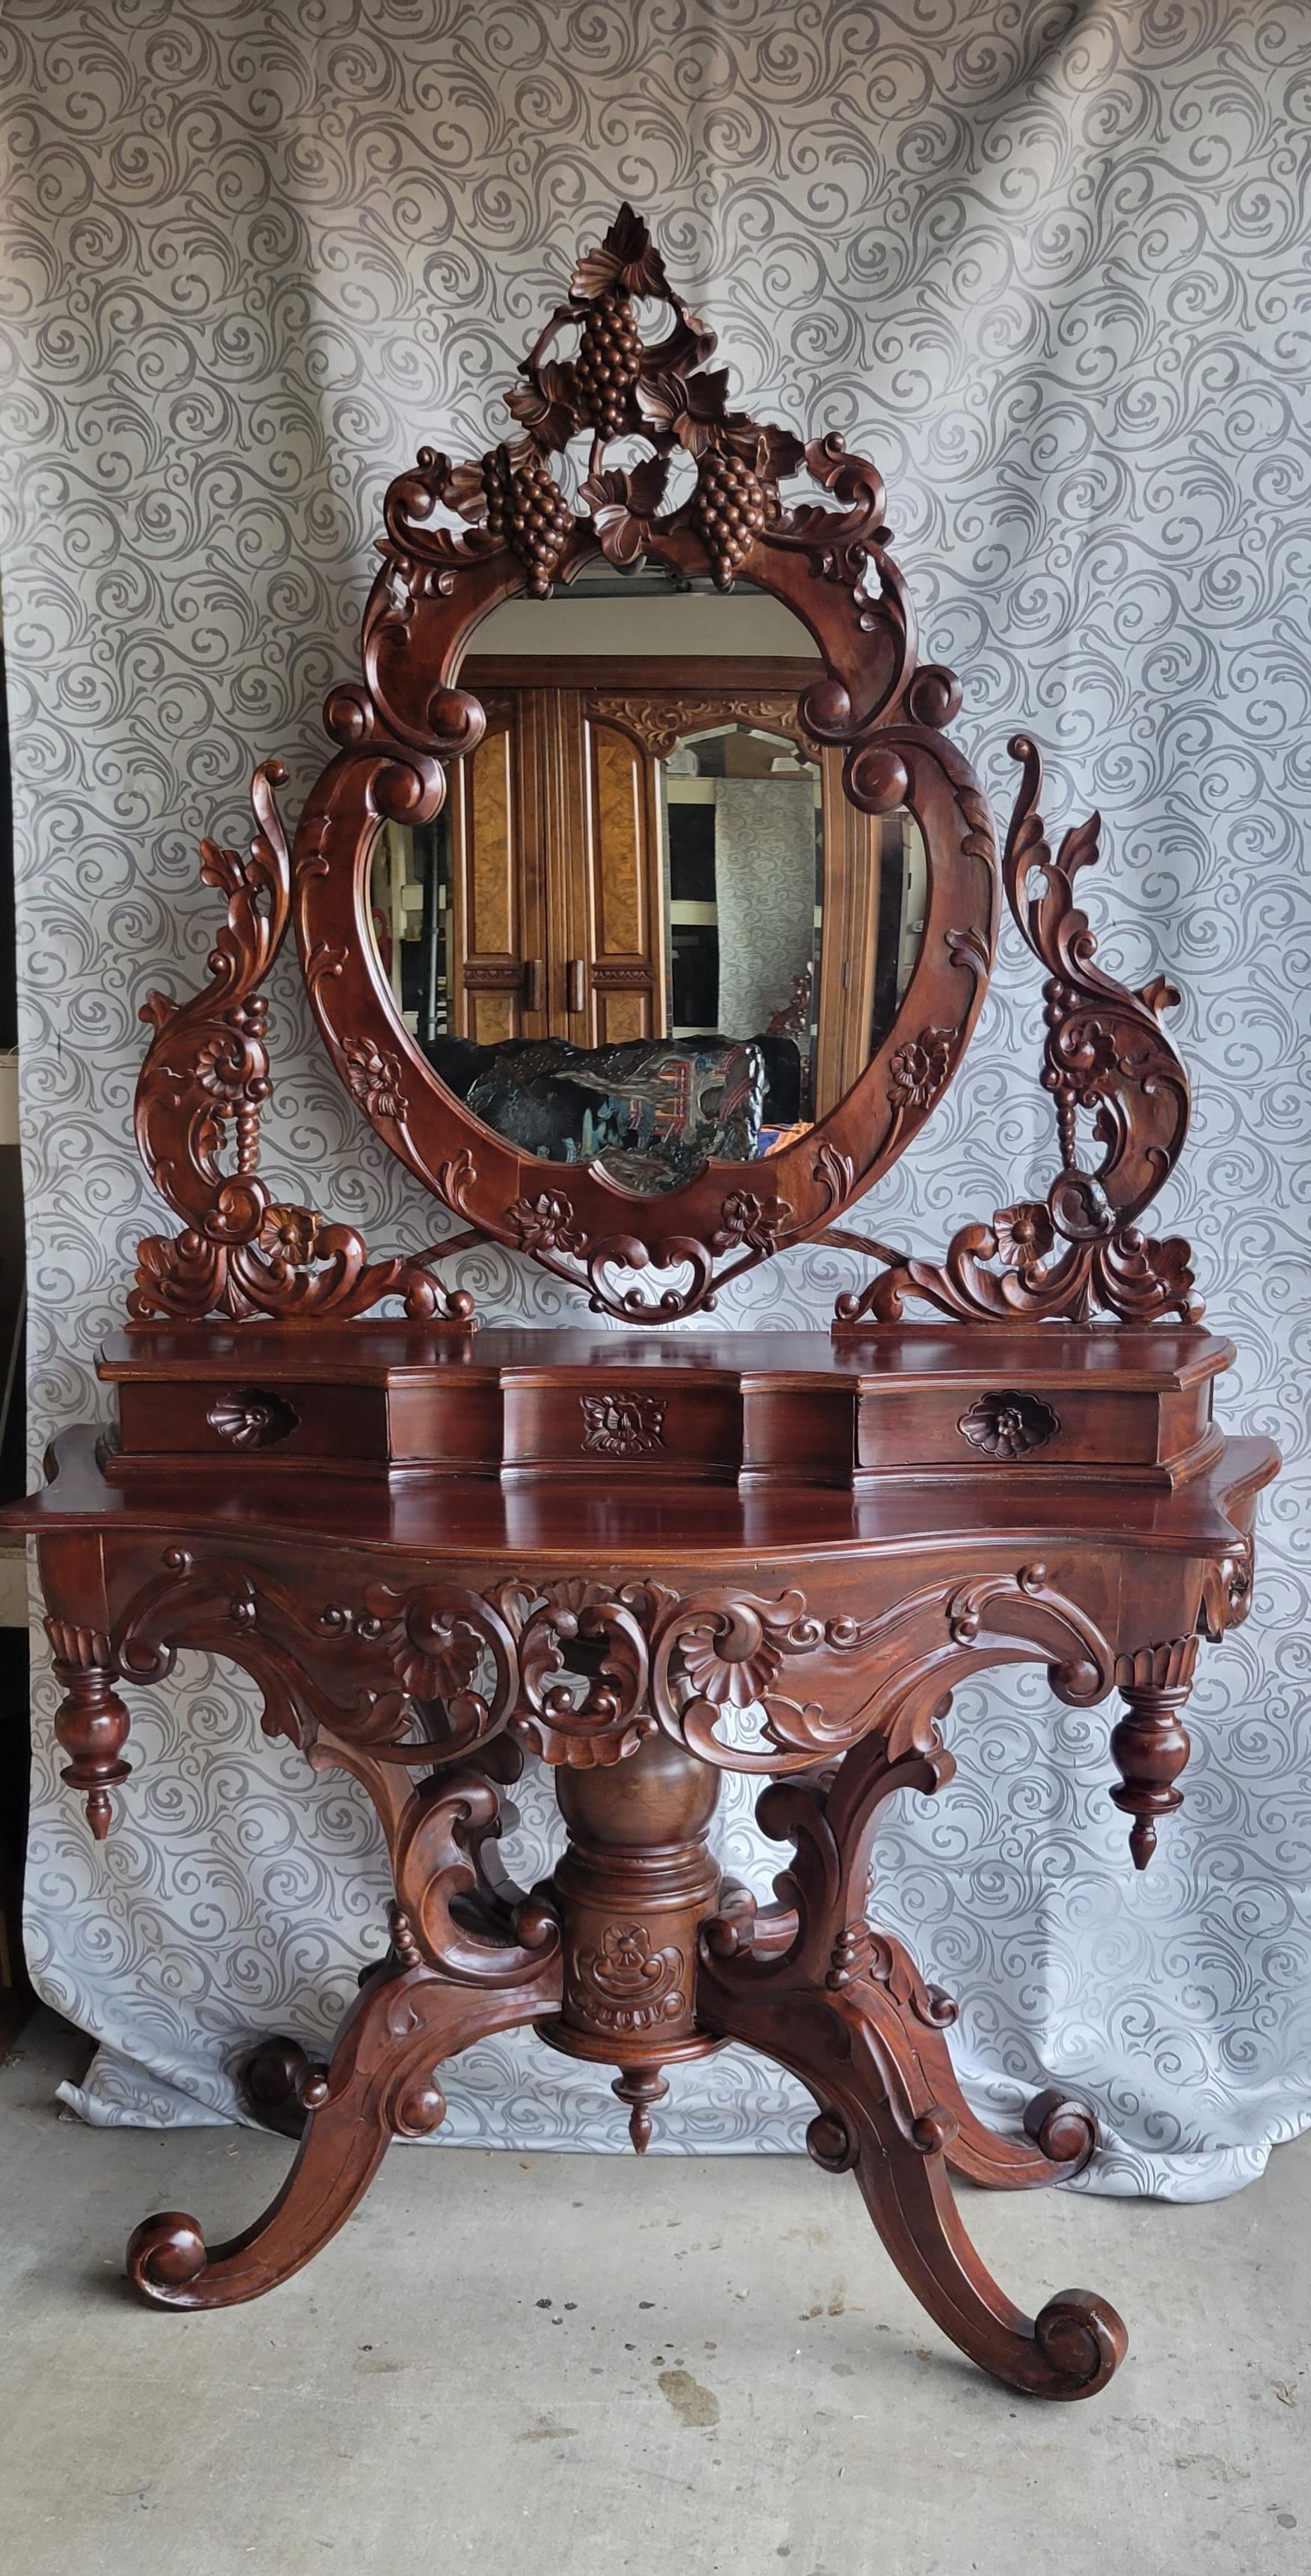 Antique hand-carved vanity with two drawers and an oval mirror. Made of solid wood with intricate carvings. The upper part with the mirror does not separate from the bottom part,  it's built as one piece.  The vanity is about 72